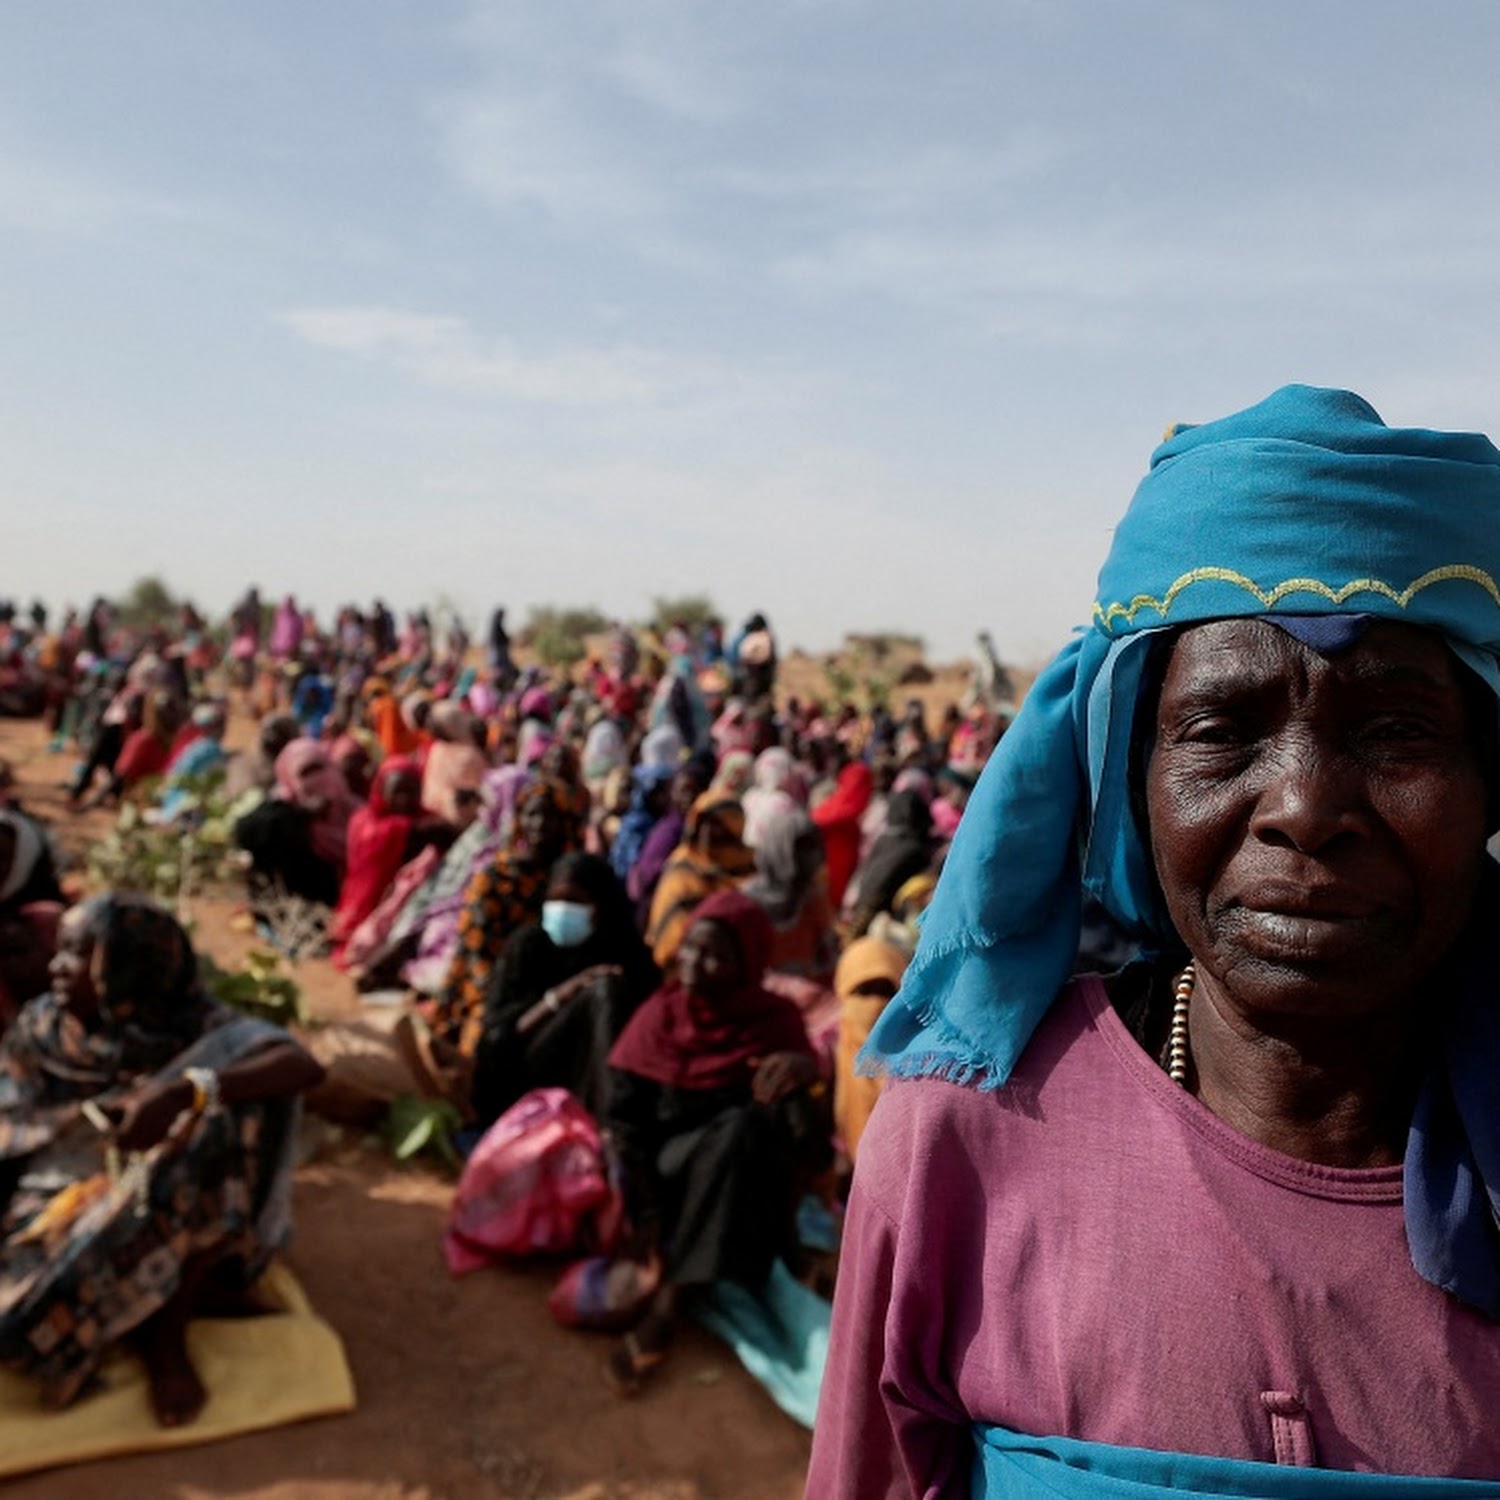 In order to escape the war, more than 90,000 Sudanese seek safety in Chad.